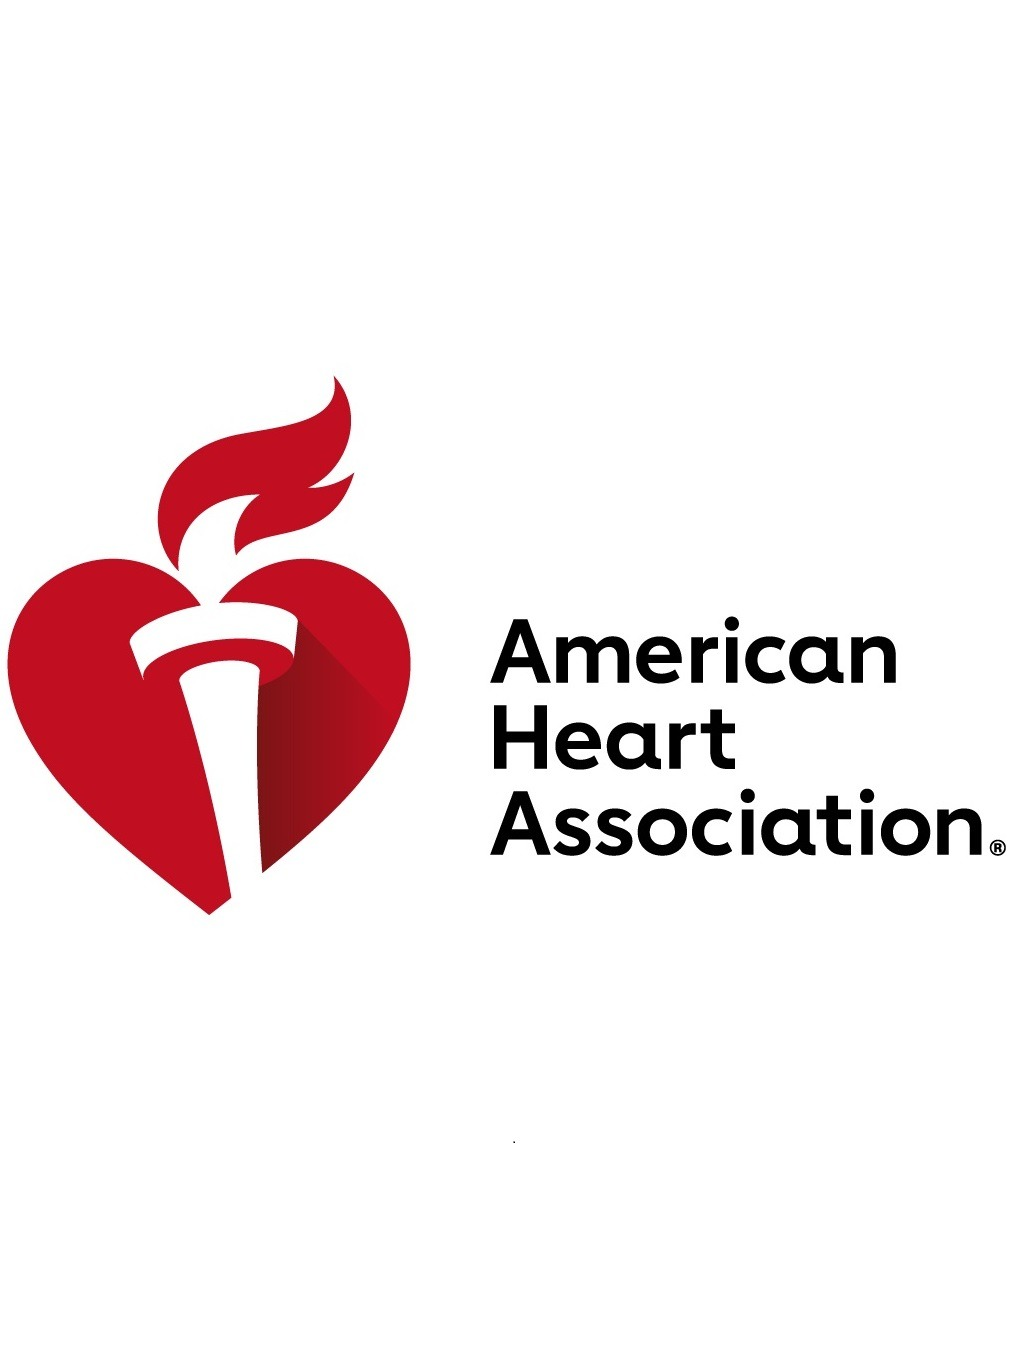 Our abstract was accepted to AHA 2023 conference in Philadelphia!